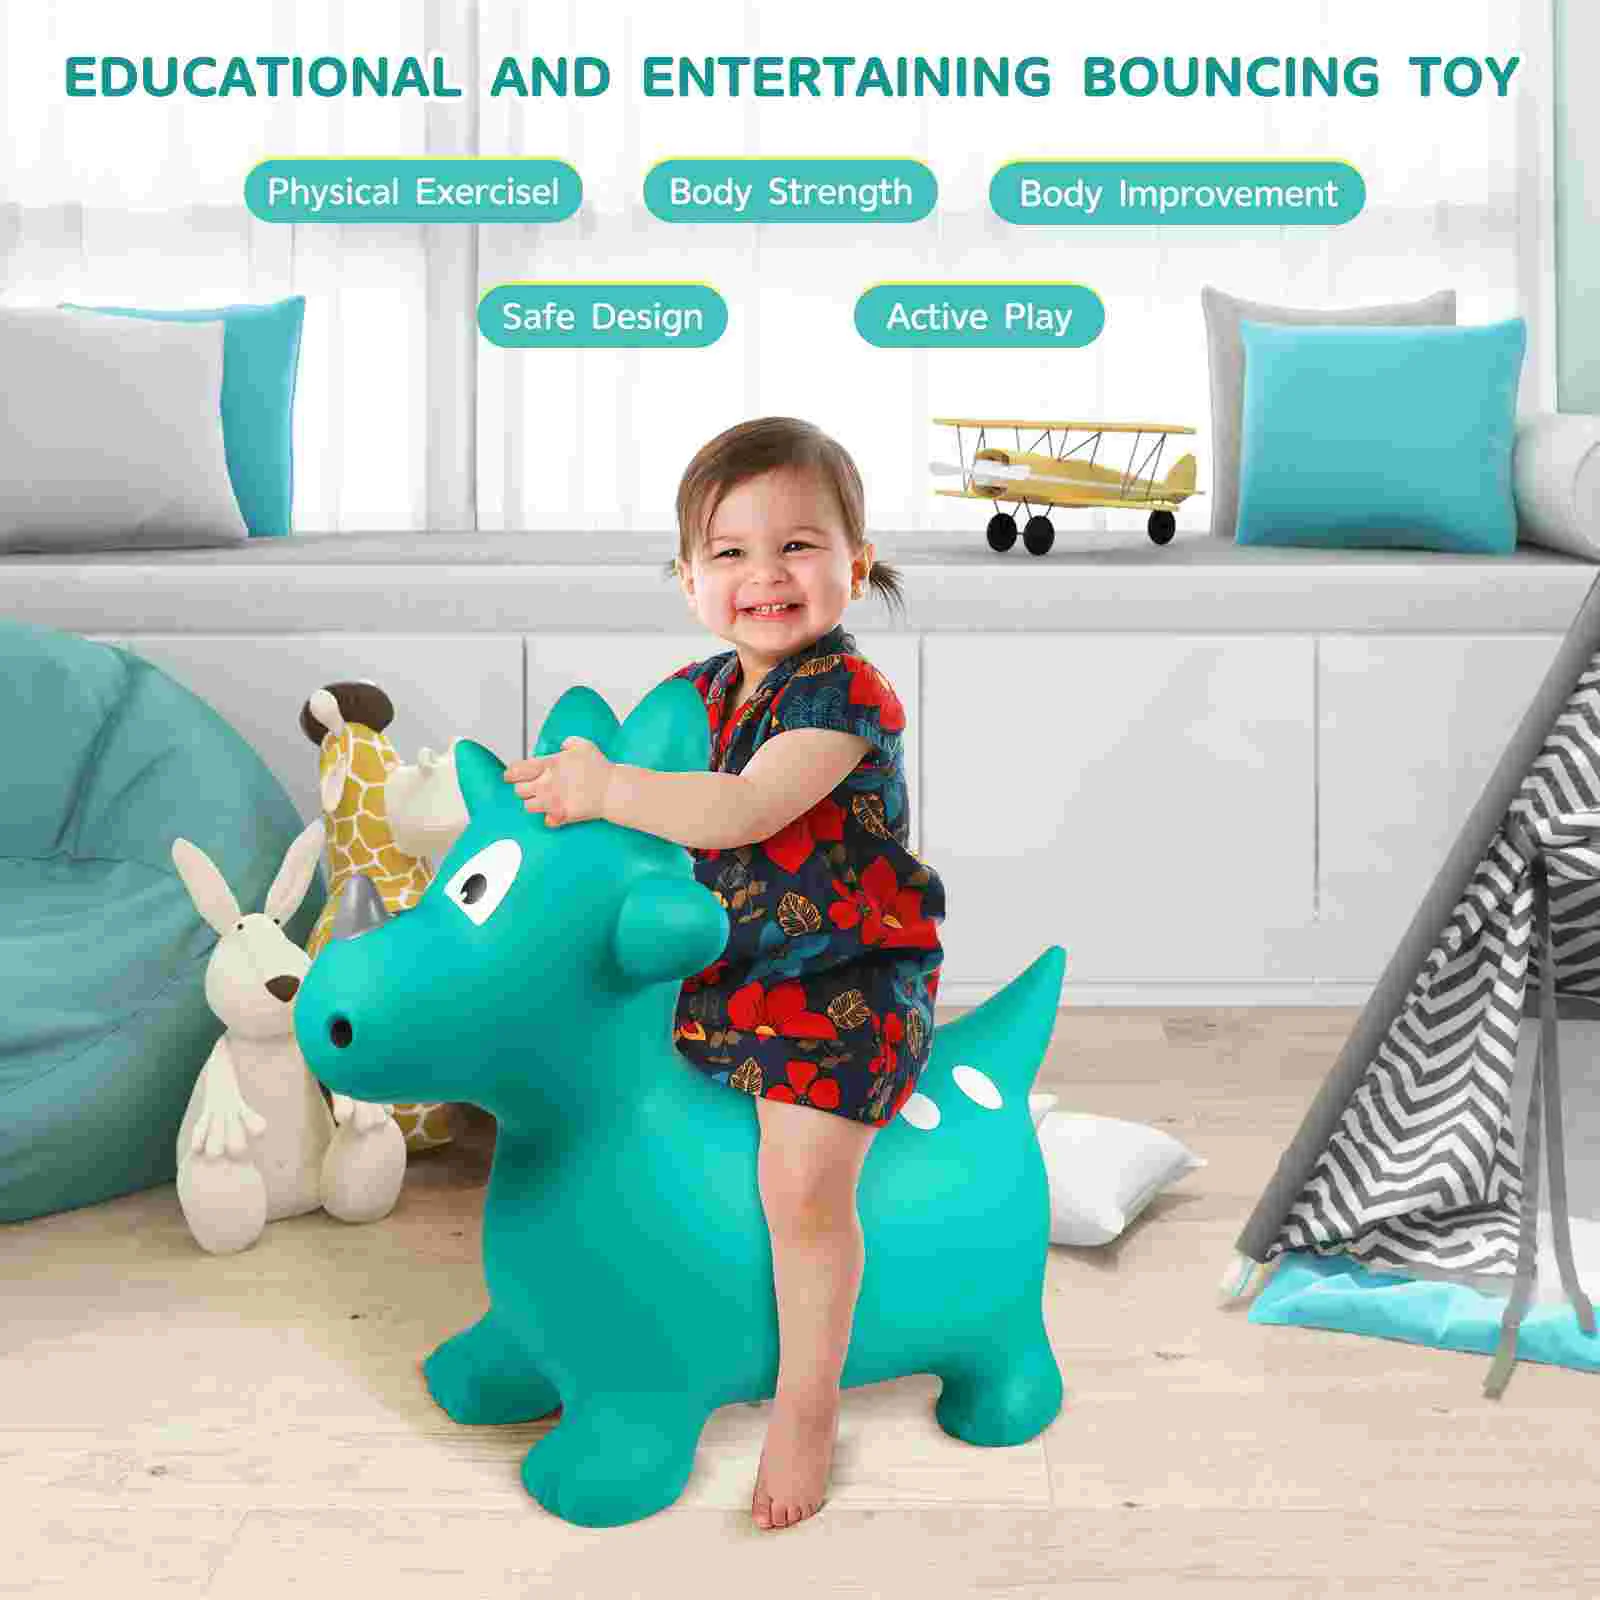 

Bouncing Ball Bouncy Dinosaur Toy Jumping Kids Toys Bounce Inflatable Pvc Hopper Child Stretchy